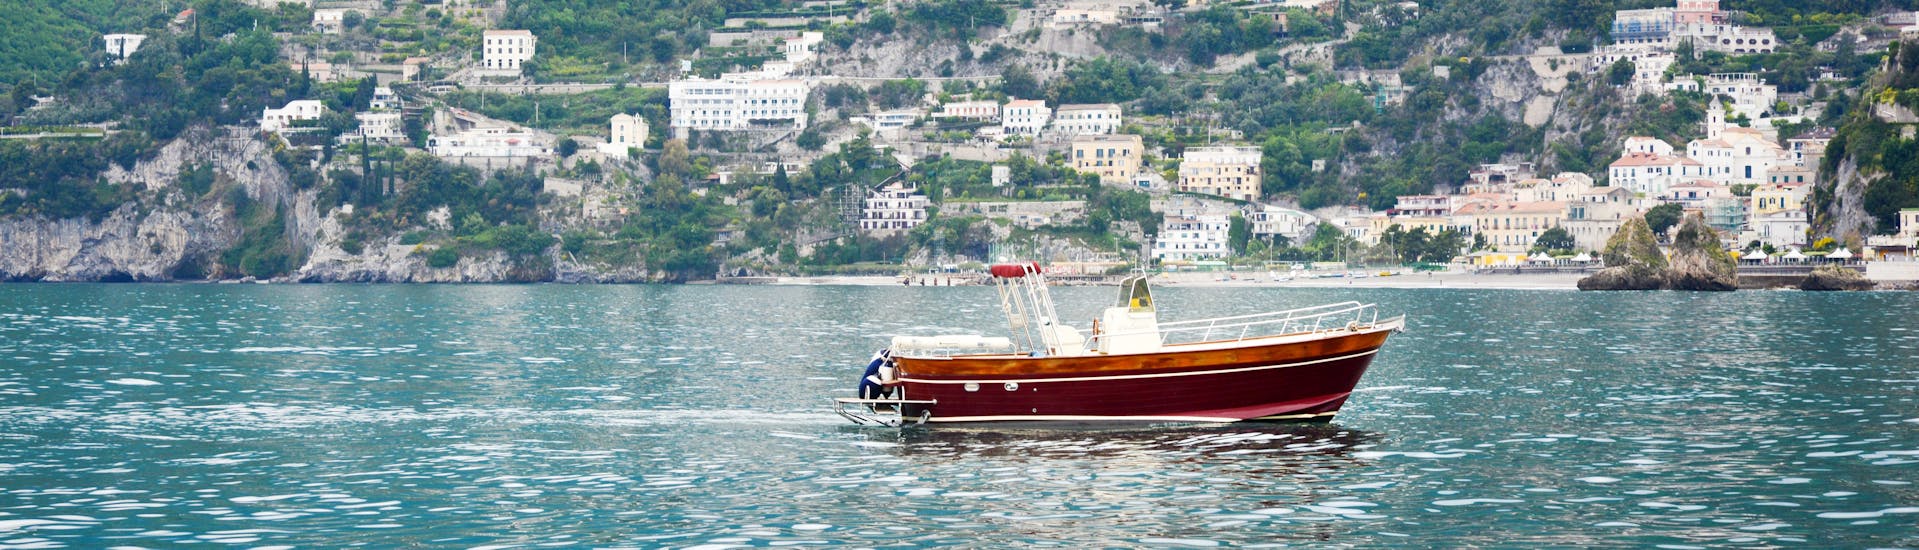 The boat from Blu Mediterraneo Amalfi Coast during the Private Boat Trip from Salerno to the Island of Capri.